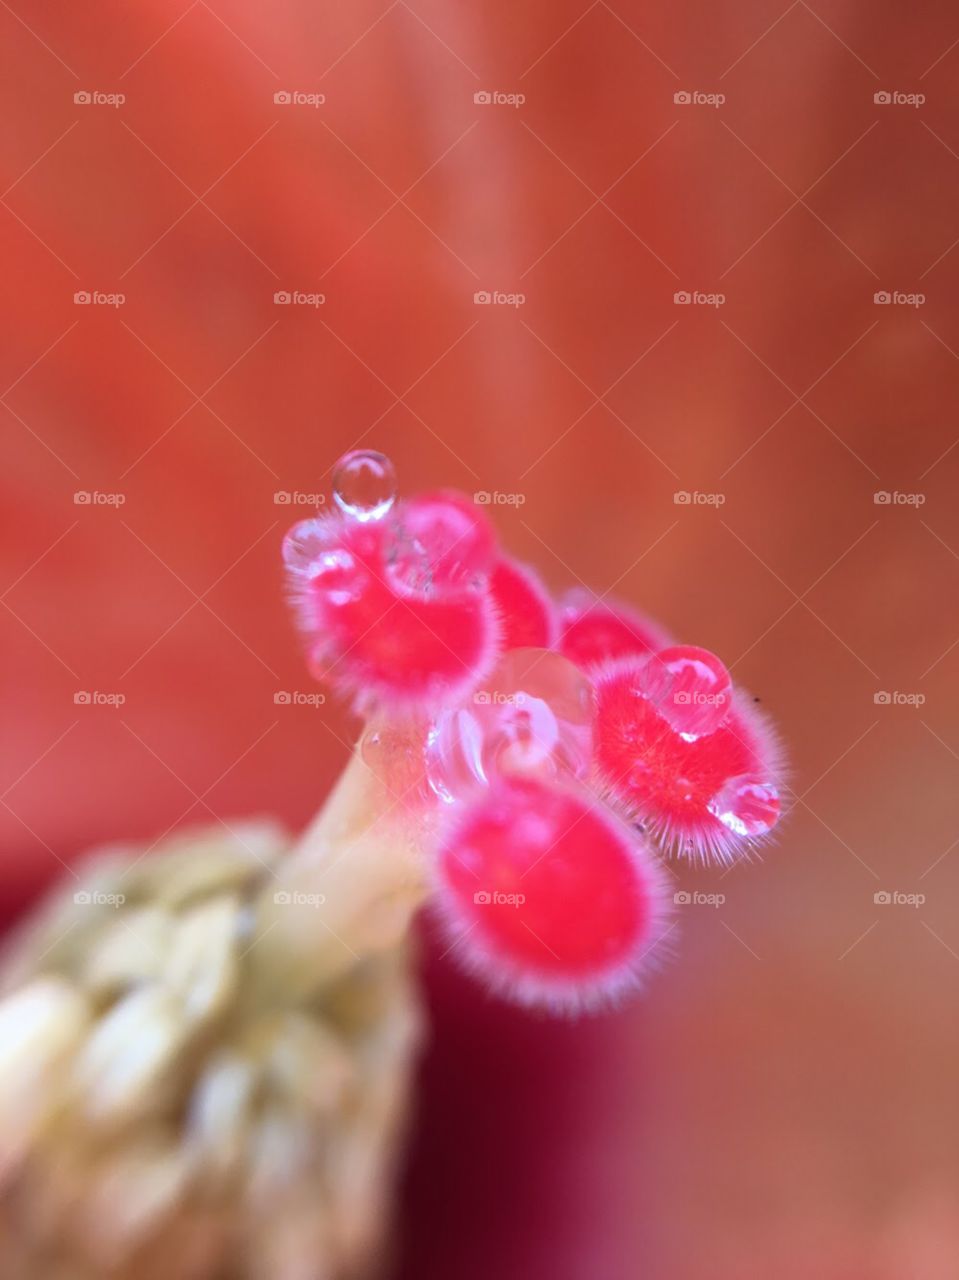 It’s an awesome feeling when you could capture such a minute things , here you see the due on a hibiscus flower which was captured using macro lens!